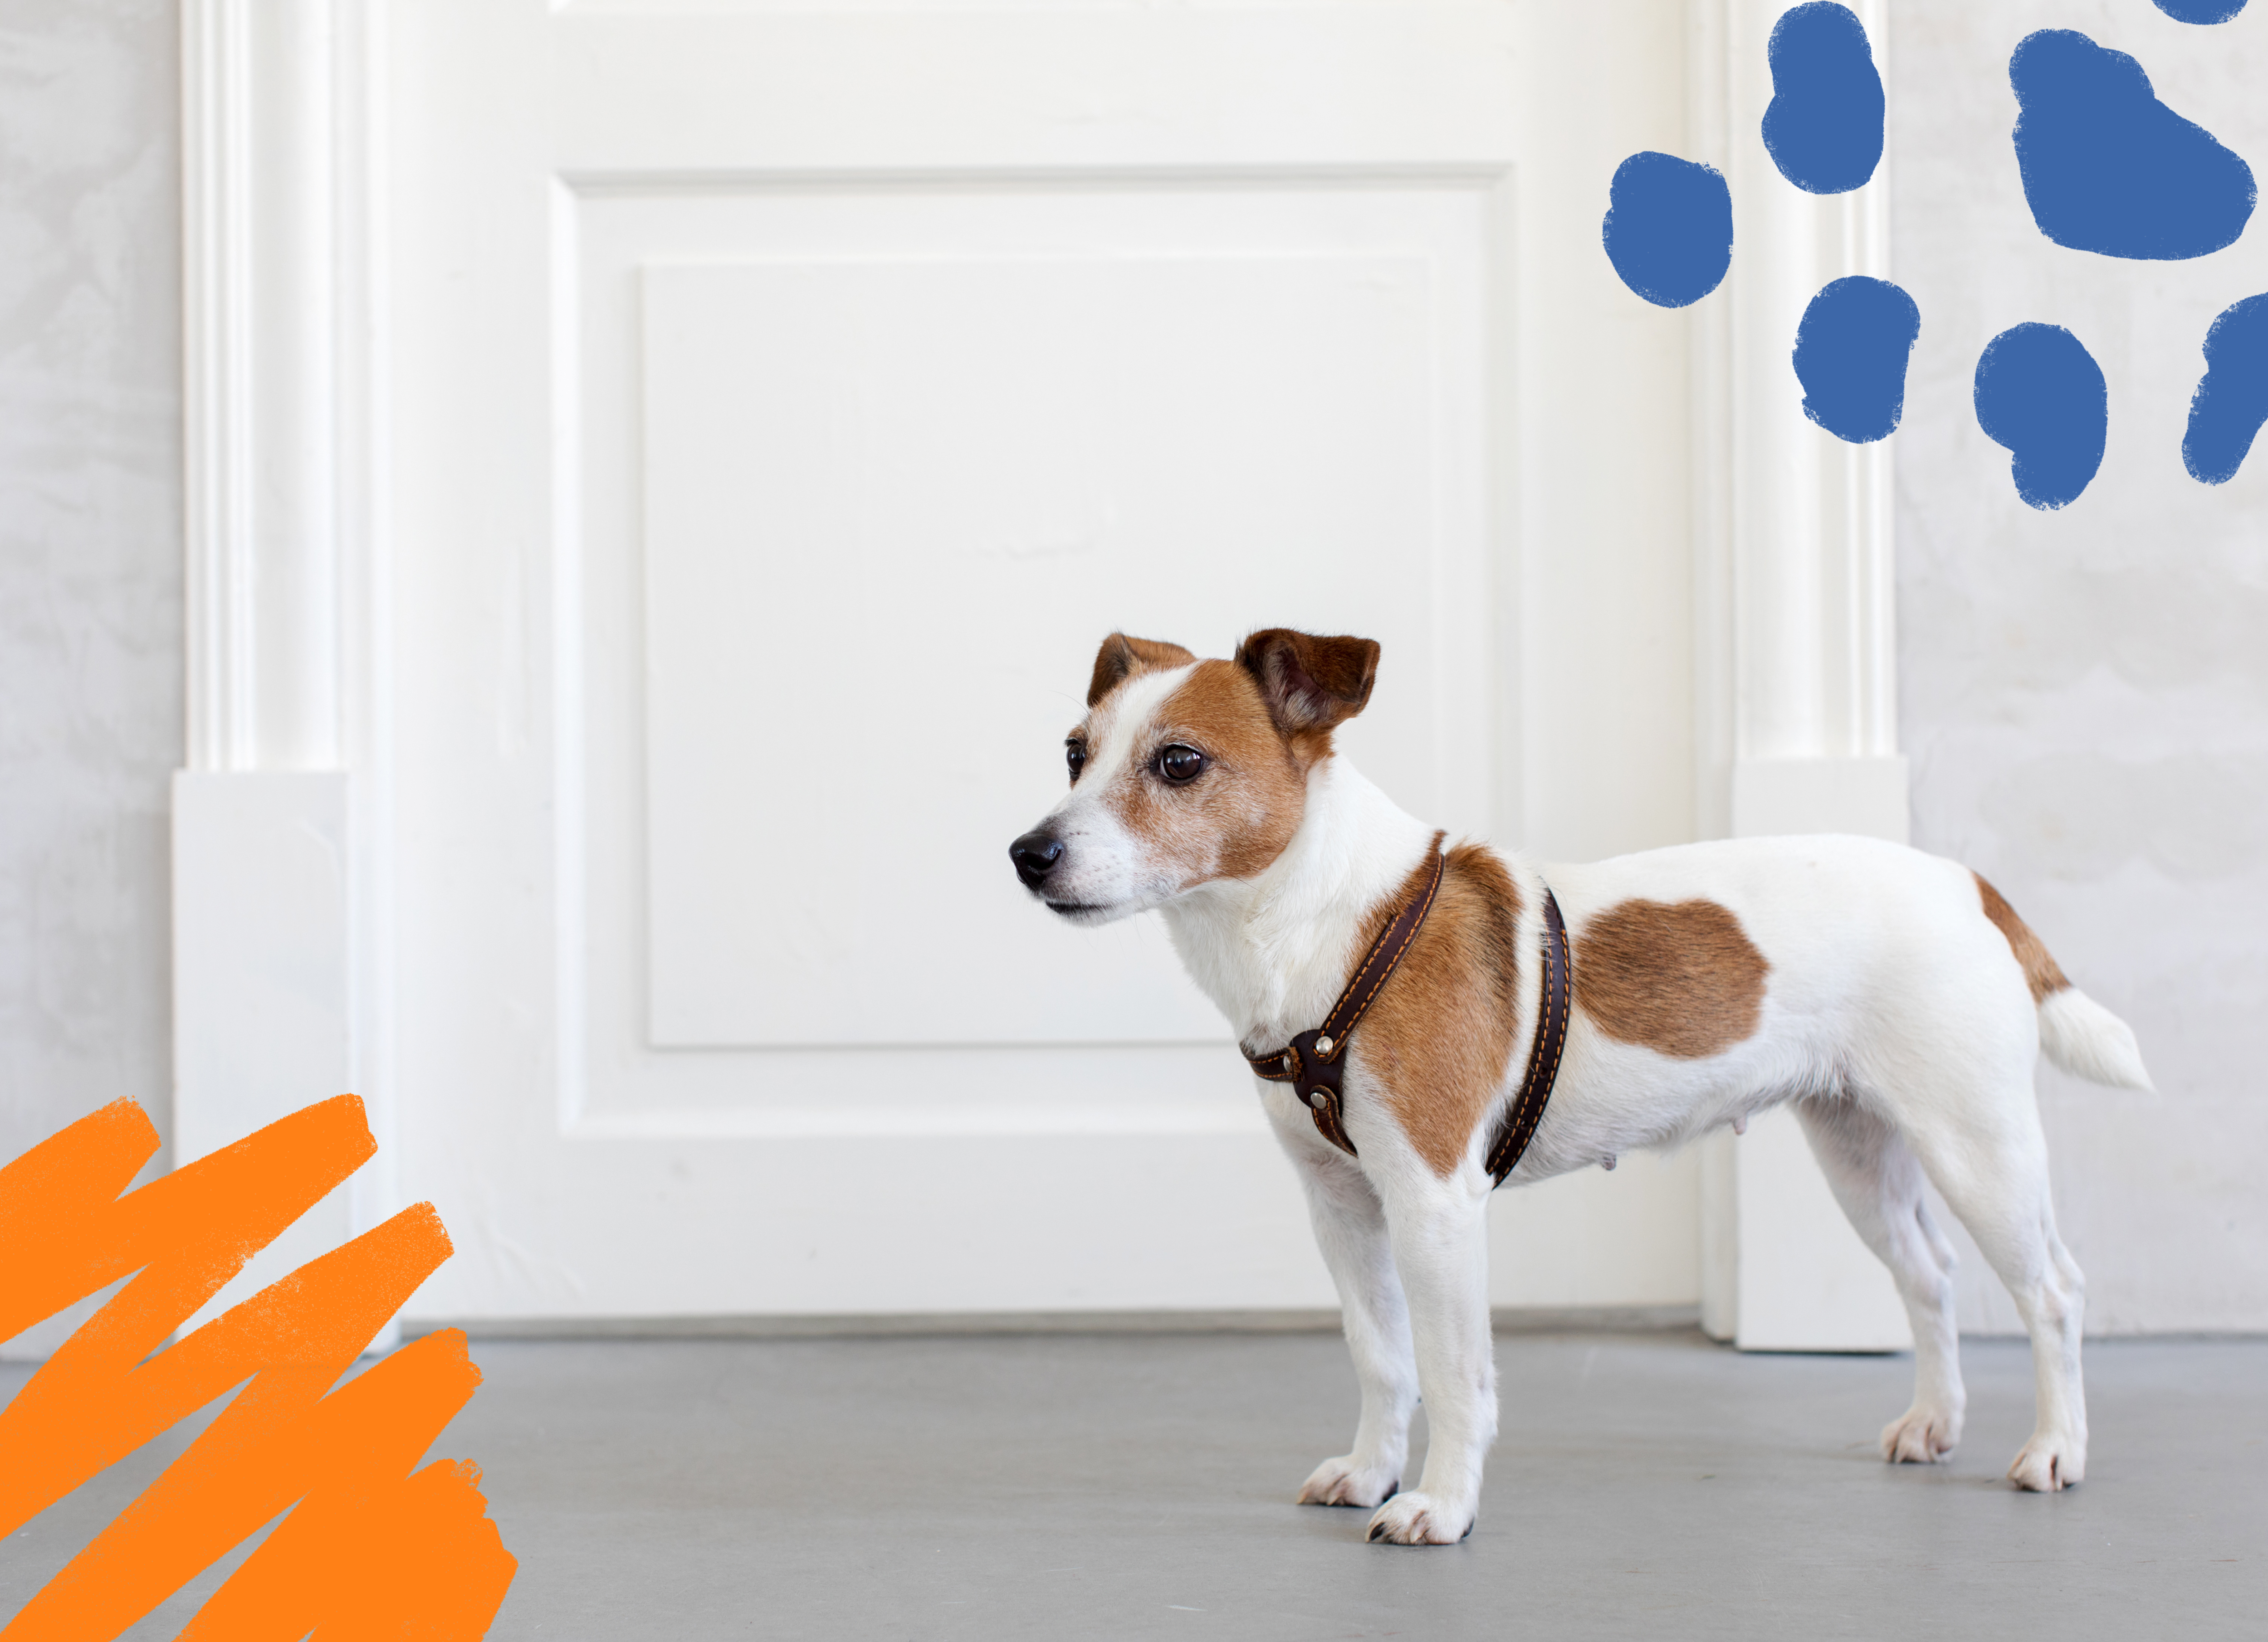 small tan and white dog wearing a harness and standing near a white door